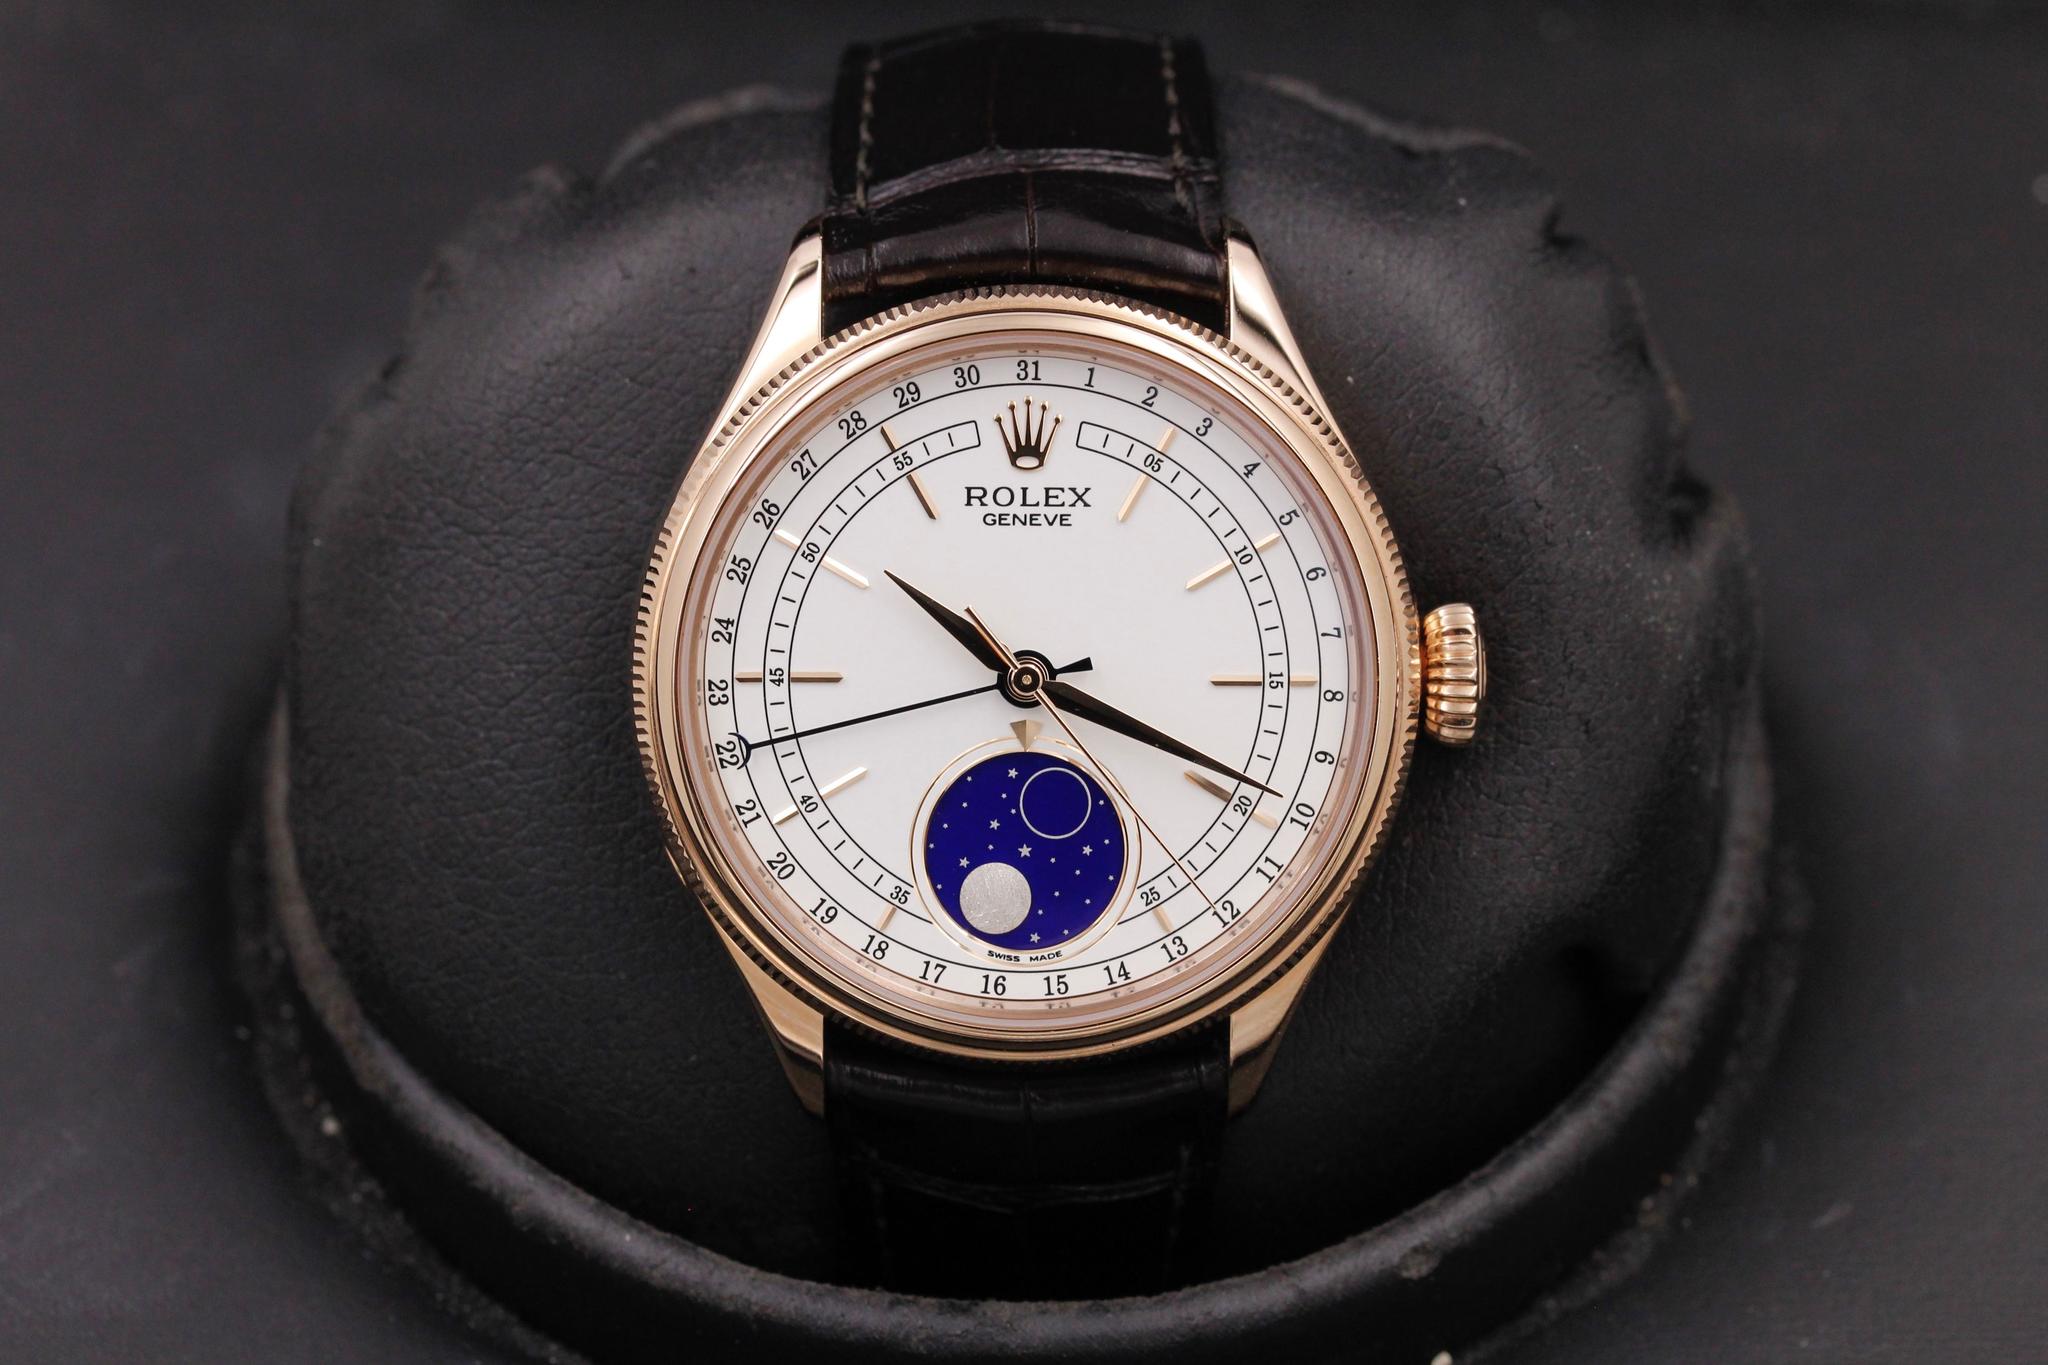 Rolex Cellini Moonphase | WATCH GUY